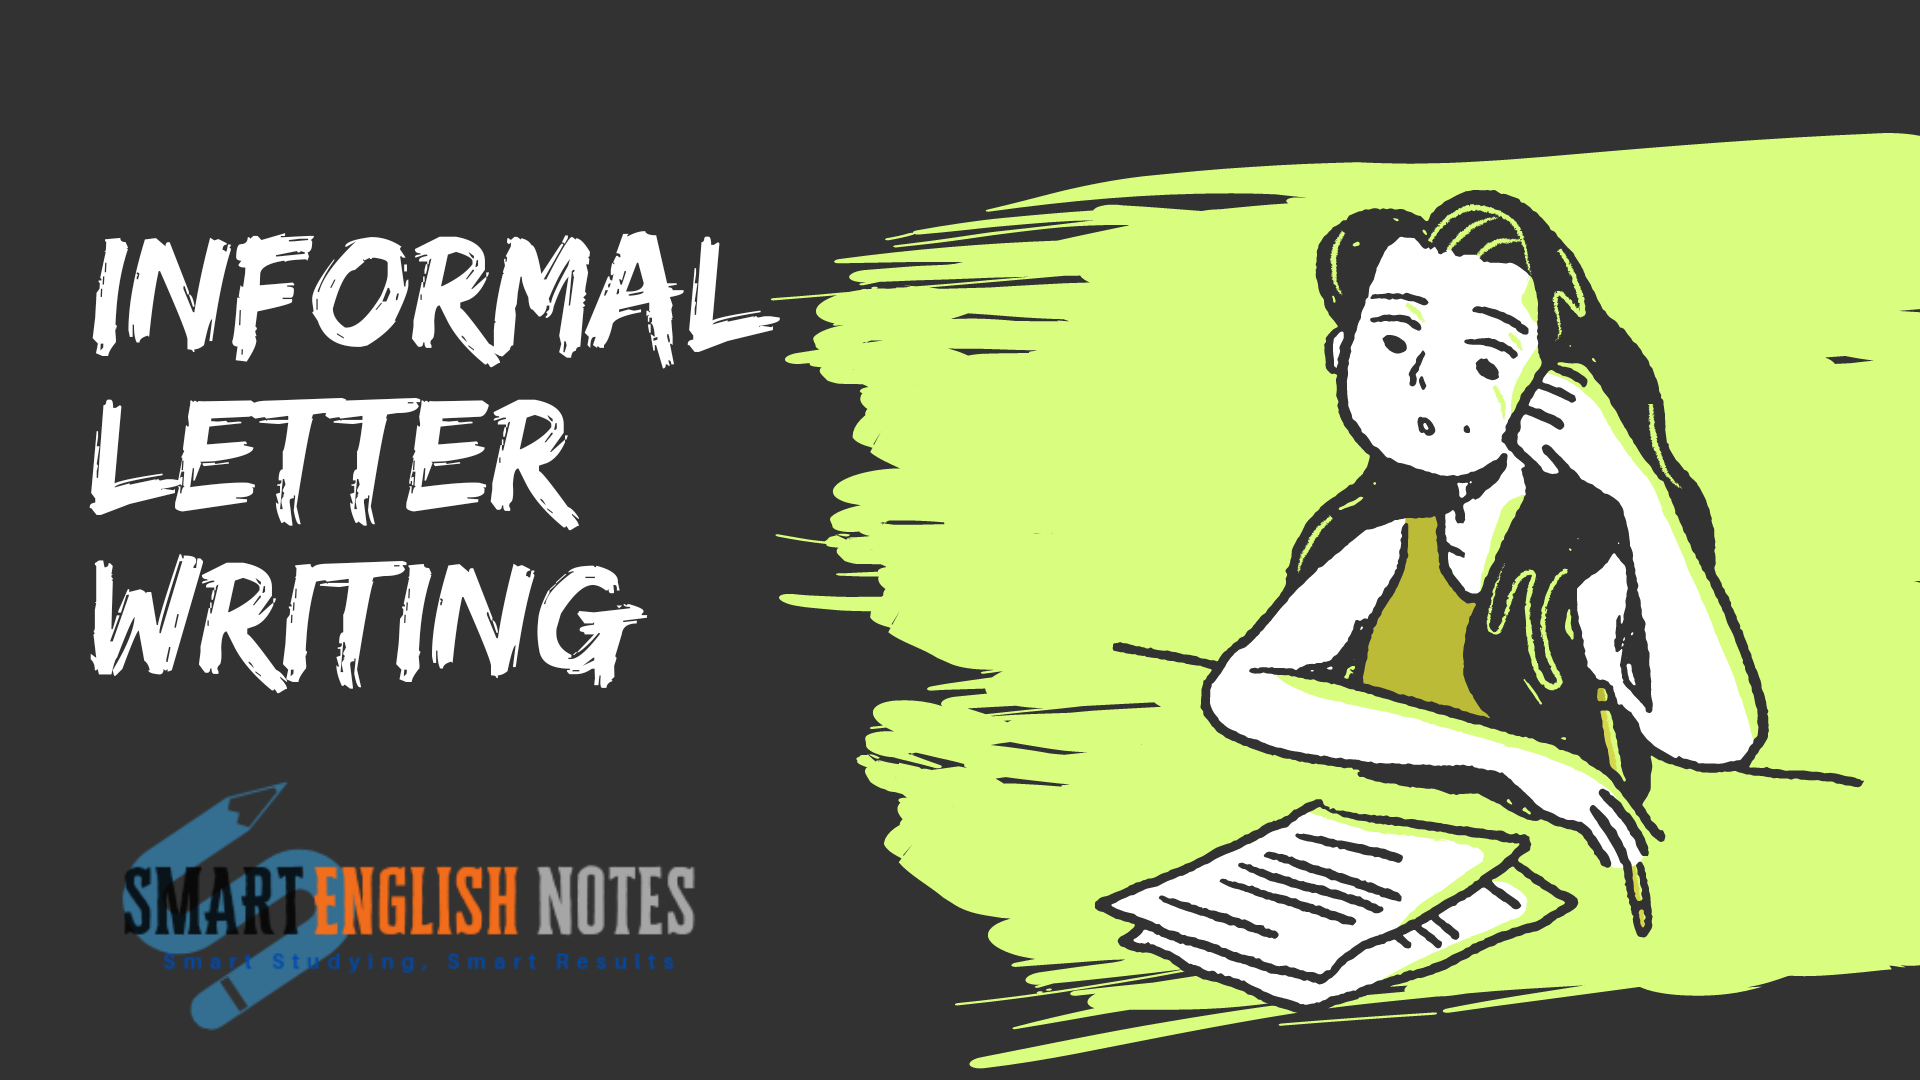 Informal Letter Writing- Types, Parts, Format and Samples of Informal Letters 1